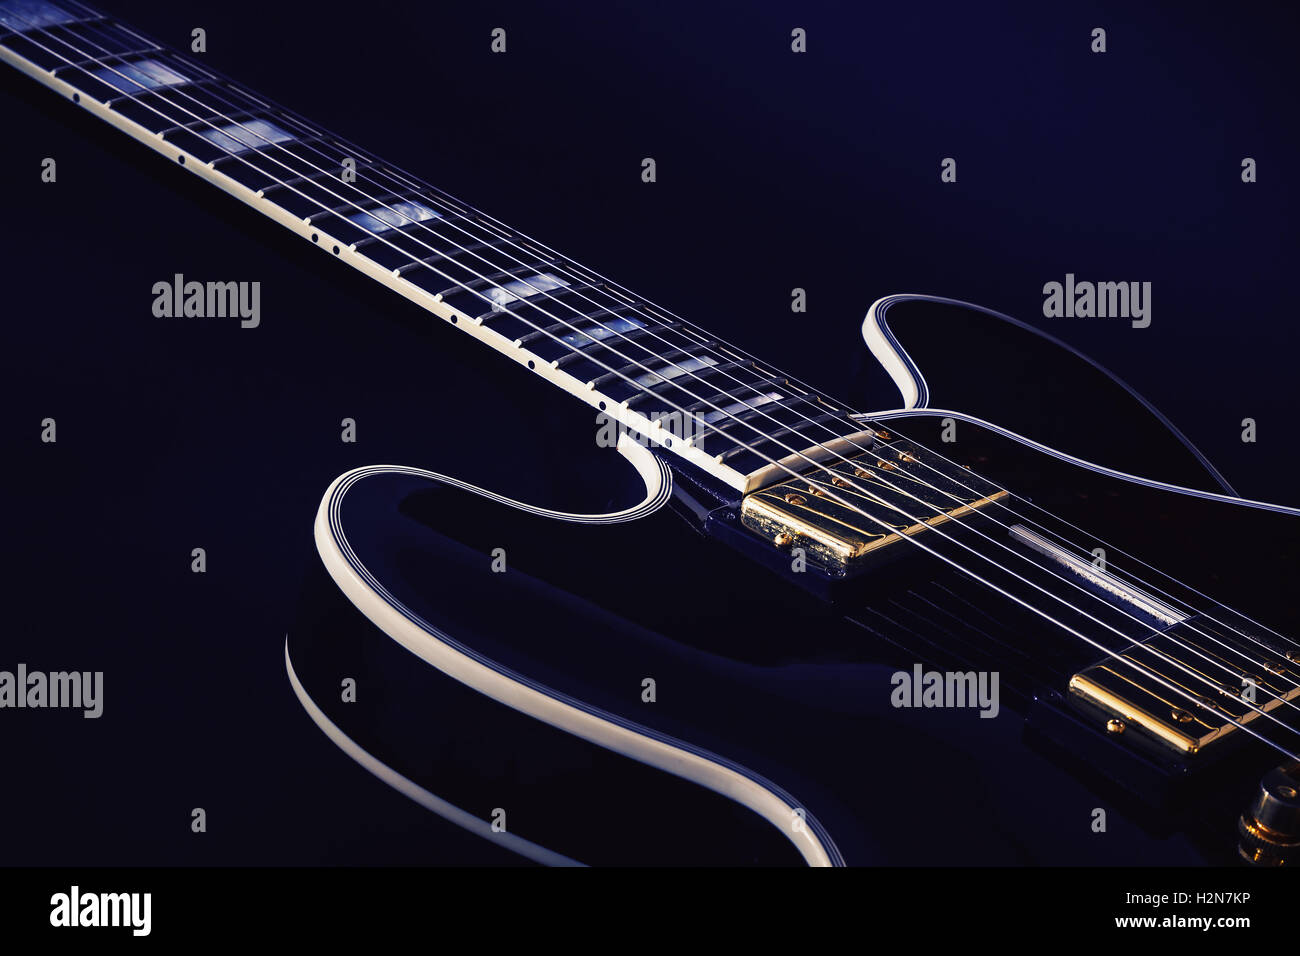 Neck and body part of an electric guitar, blue background. Stock Photo